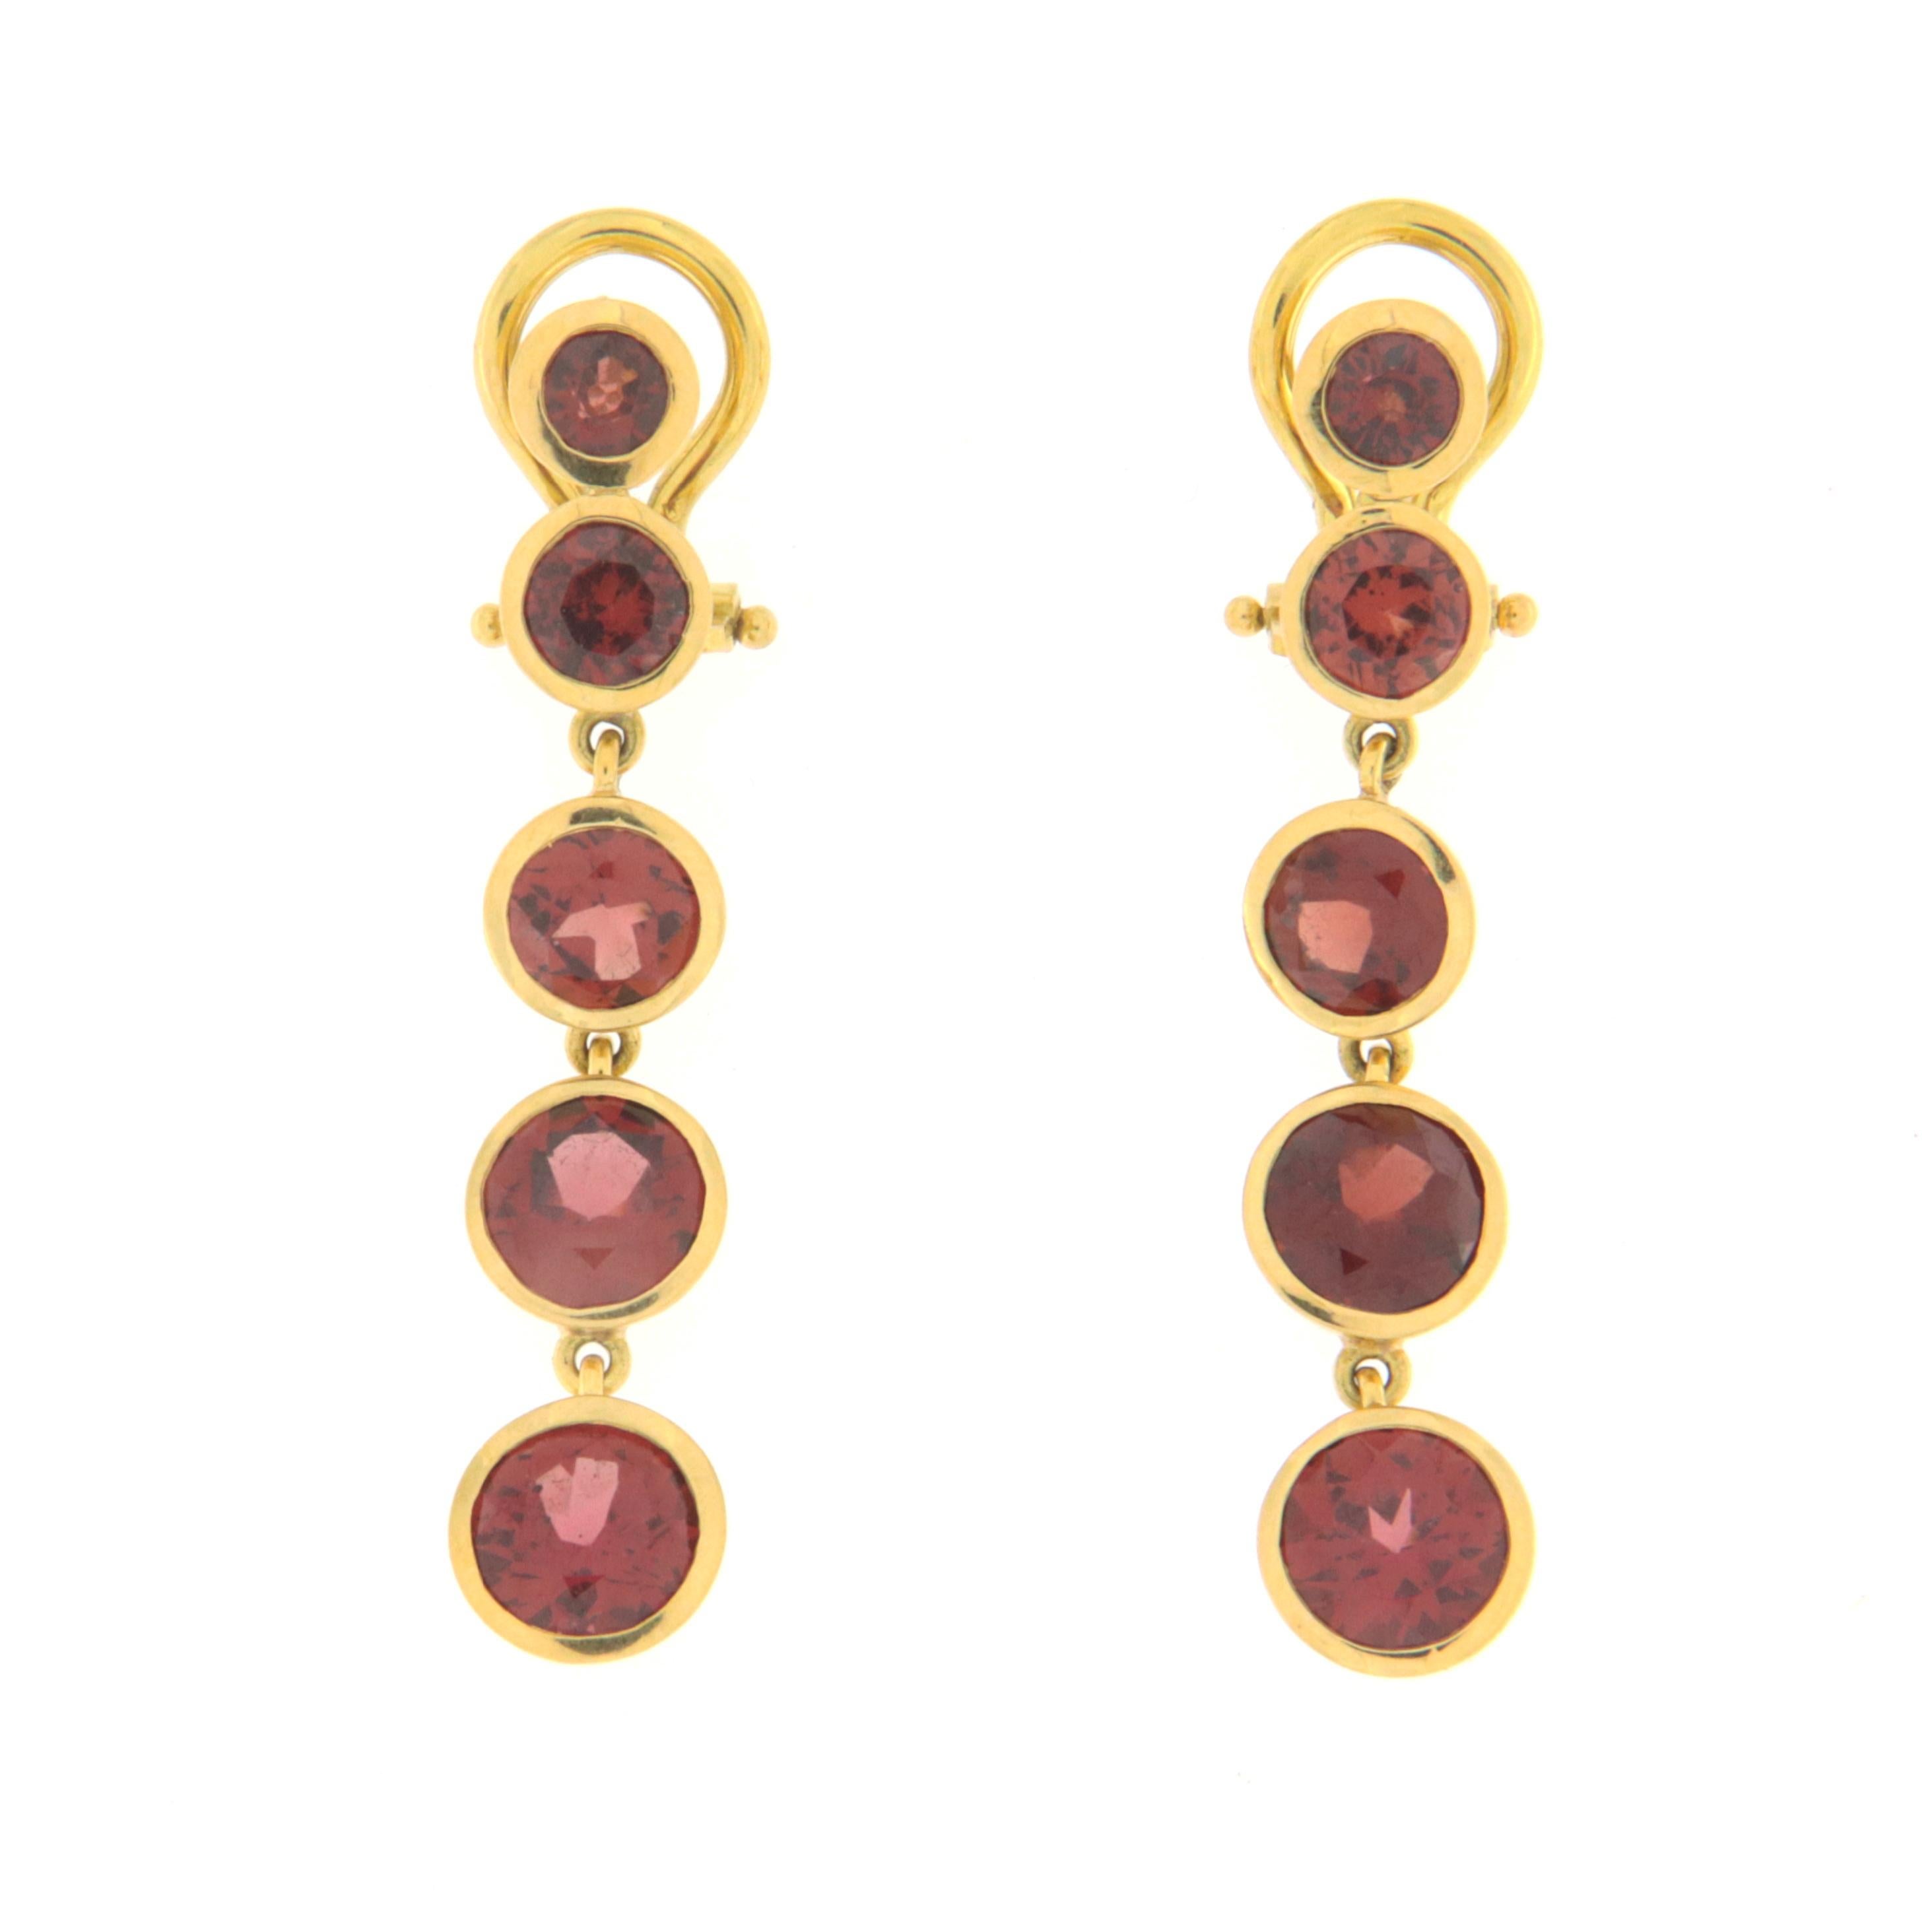 18 karat yellow gold drop earrings. Handmade by our artisans assembled with garnet stones
This vintage-flavored garnet earrings enhances the deep wine-red hues of this stone cut into round, and brought into contact with the skin it protects against